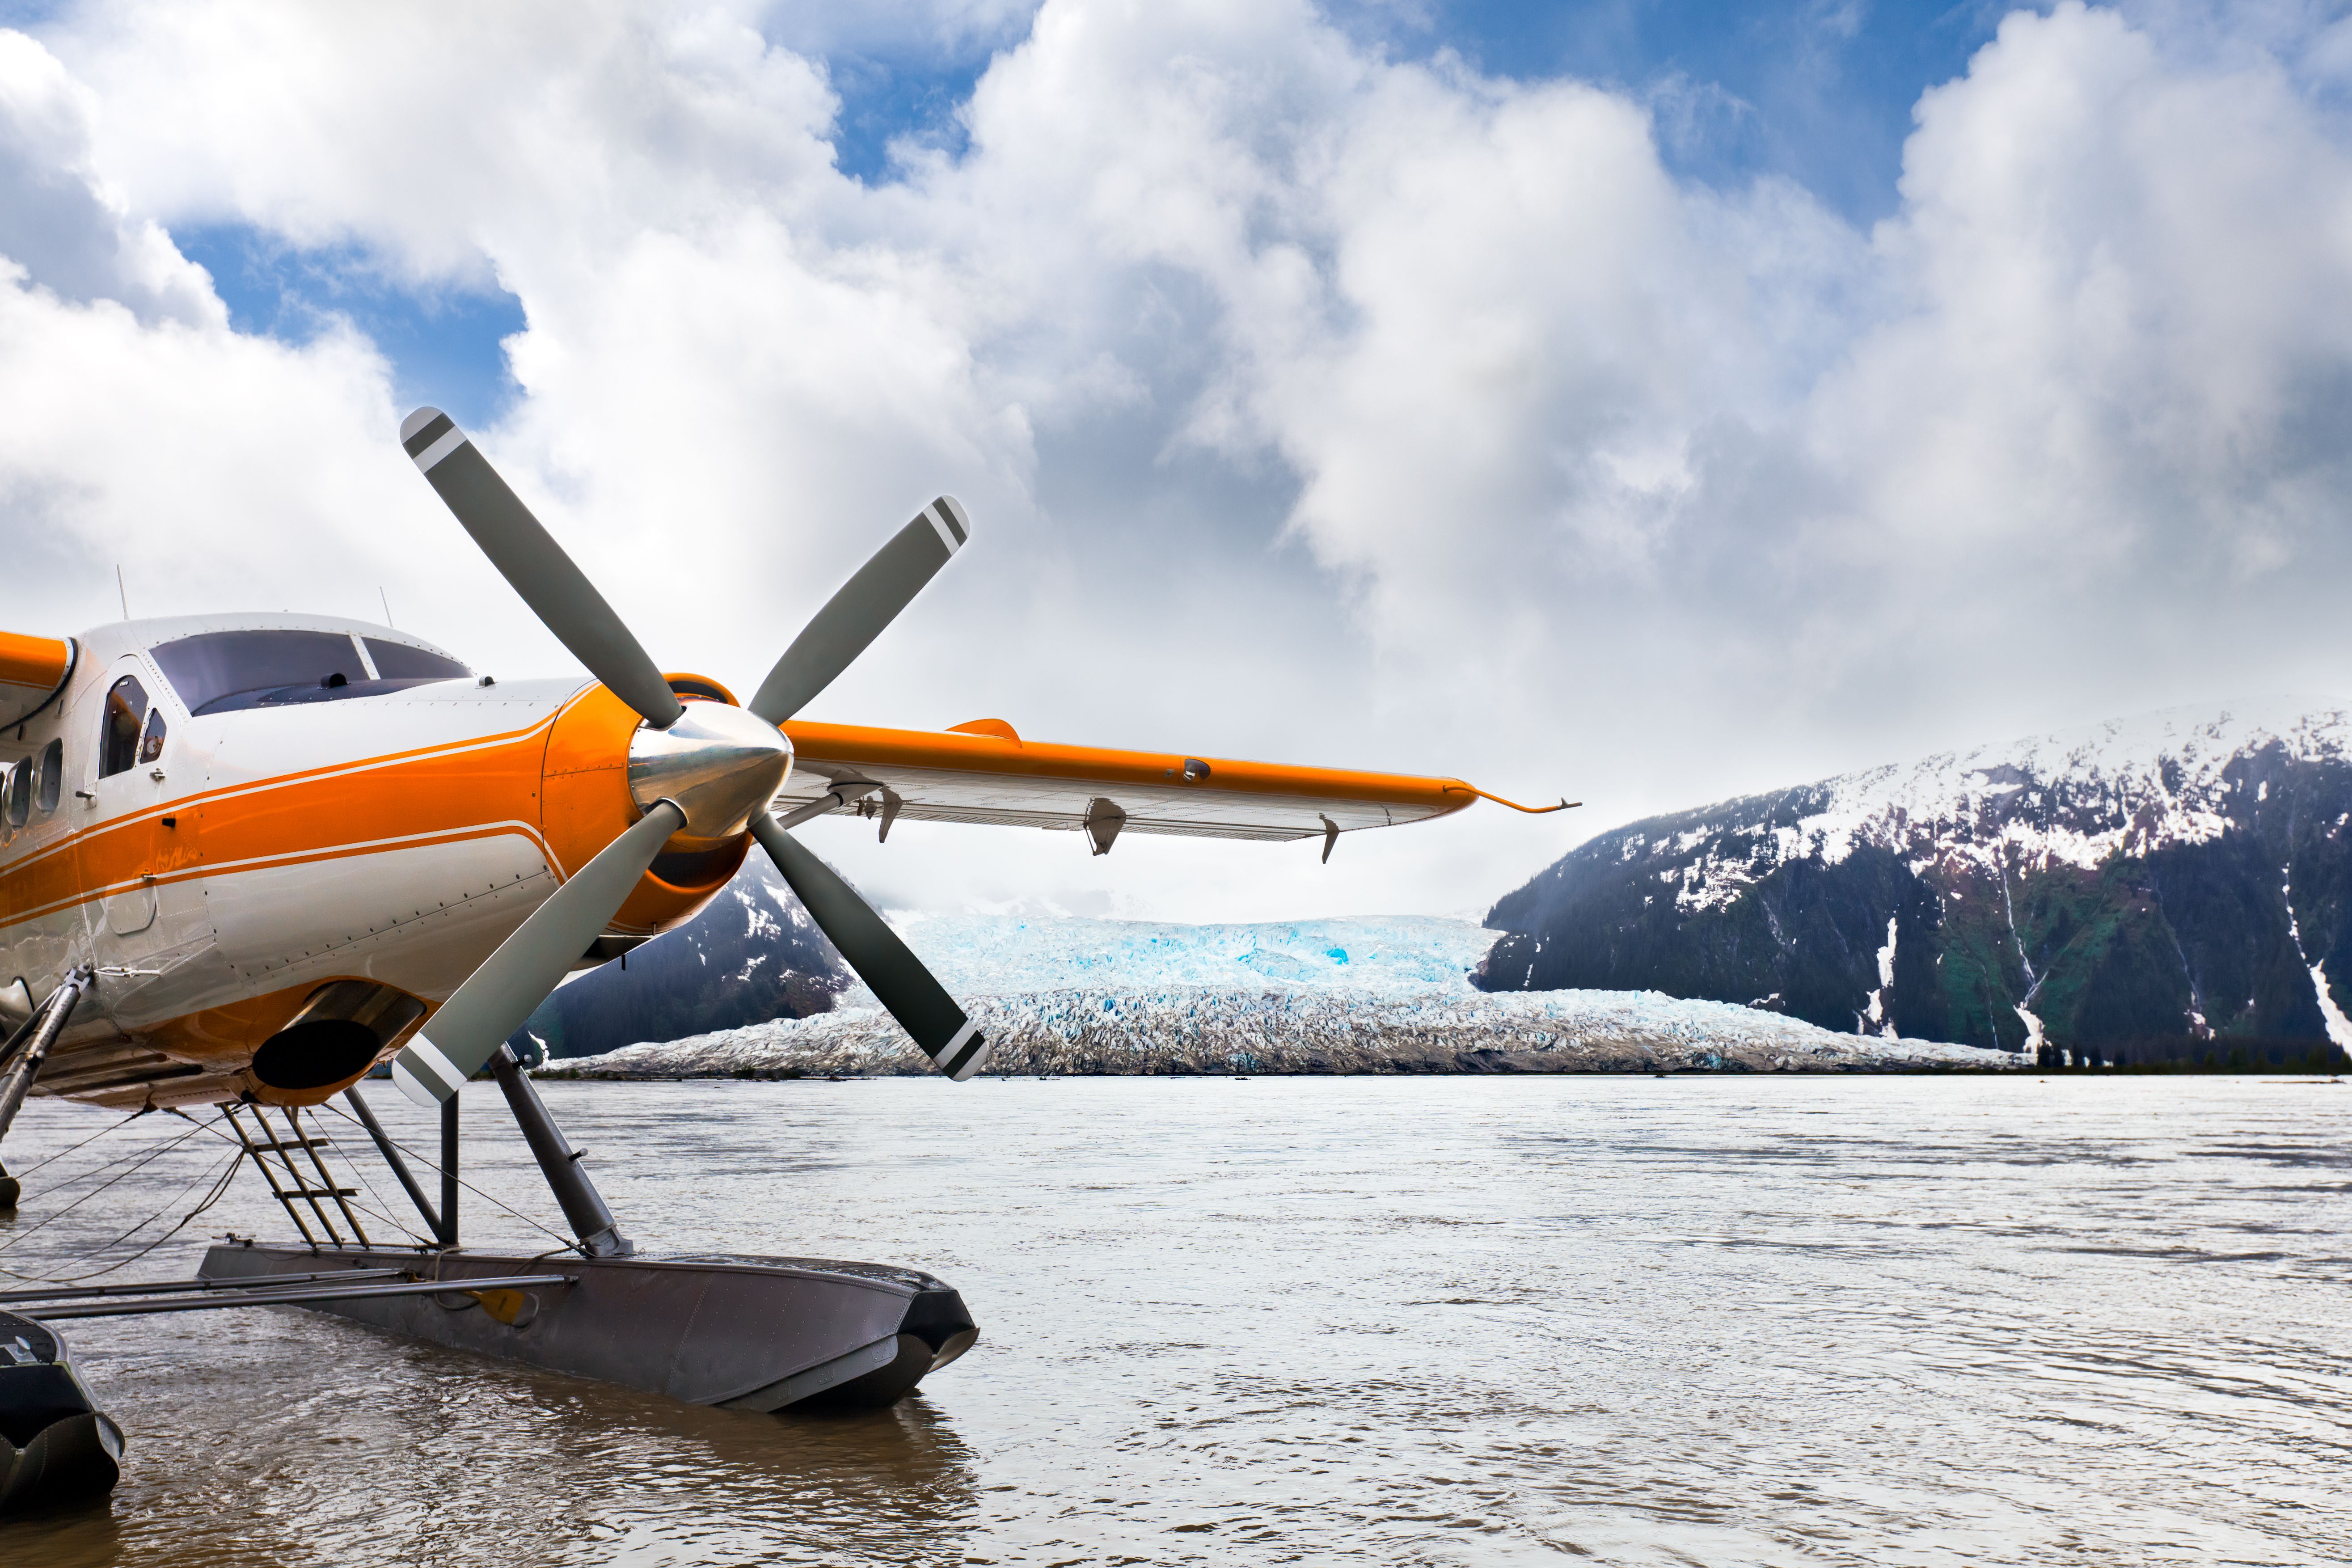 Seaplane or float plane in Alaska. The plane has landed under stormy skies near a glacier.